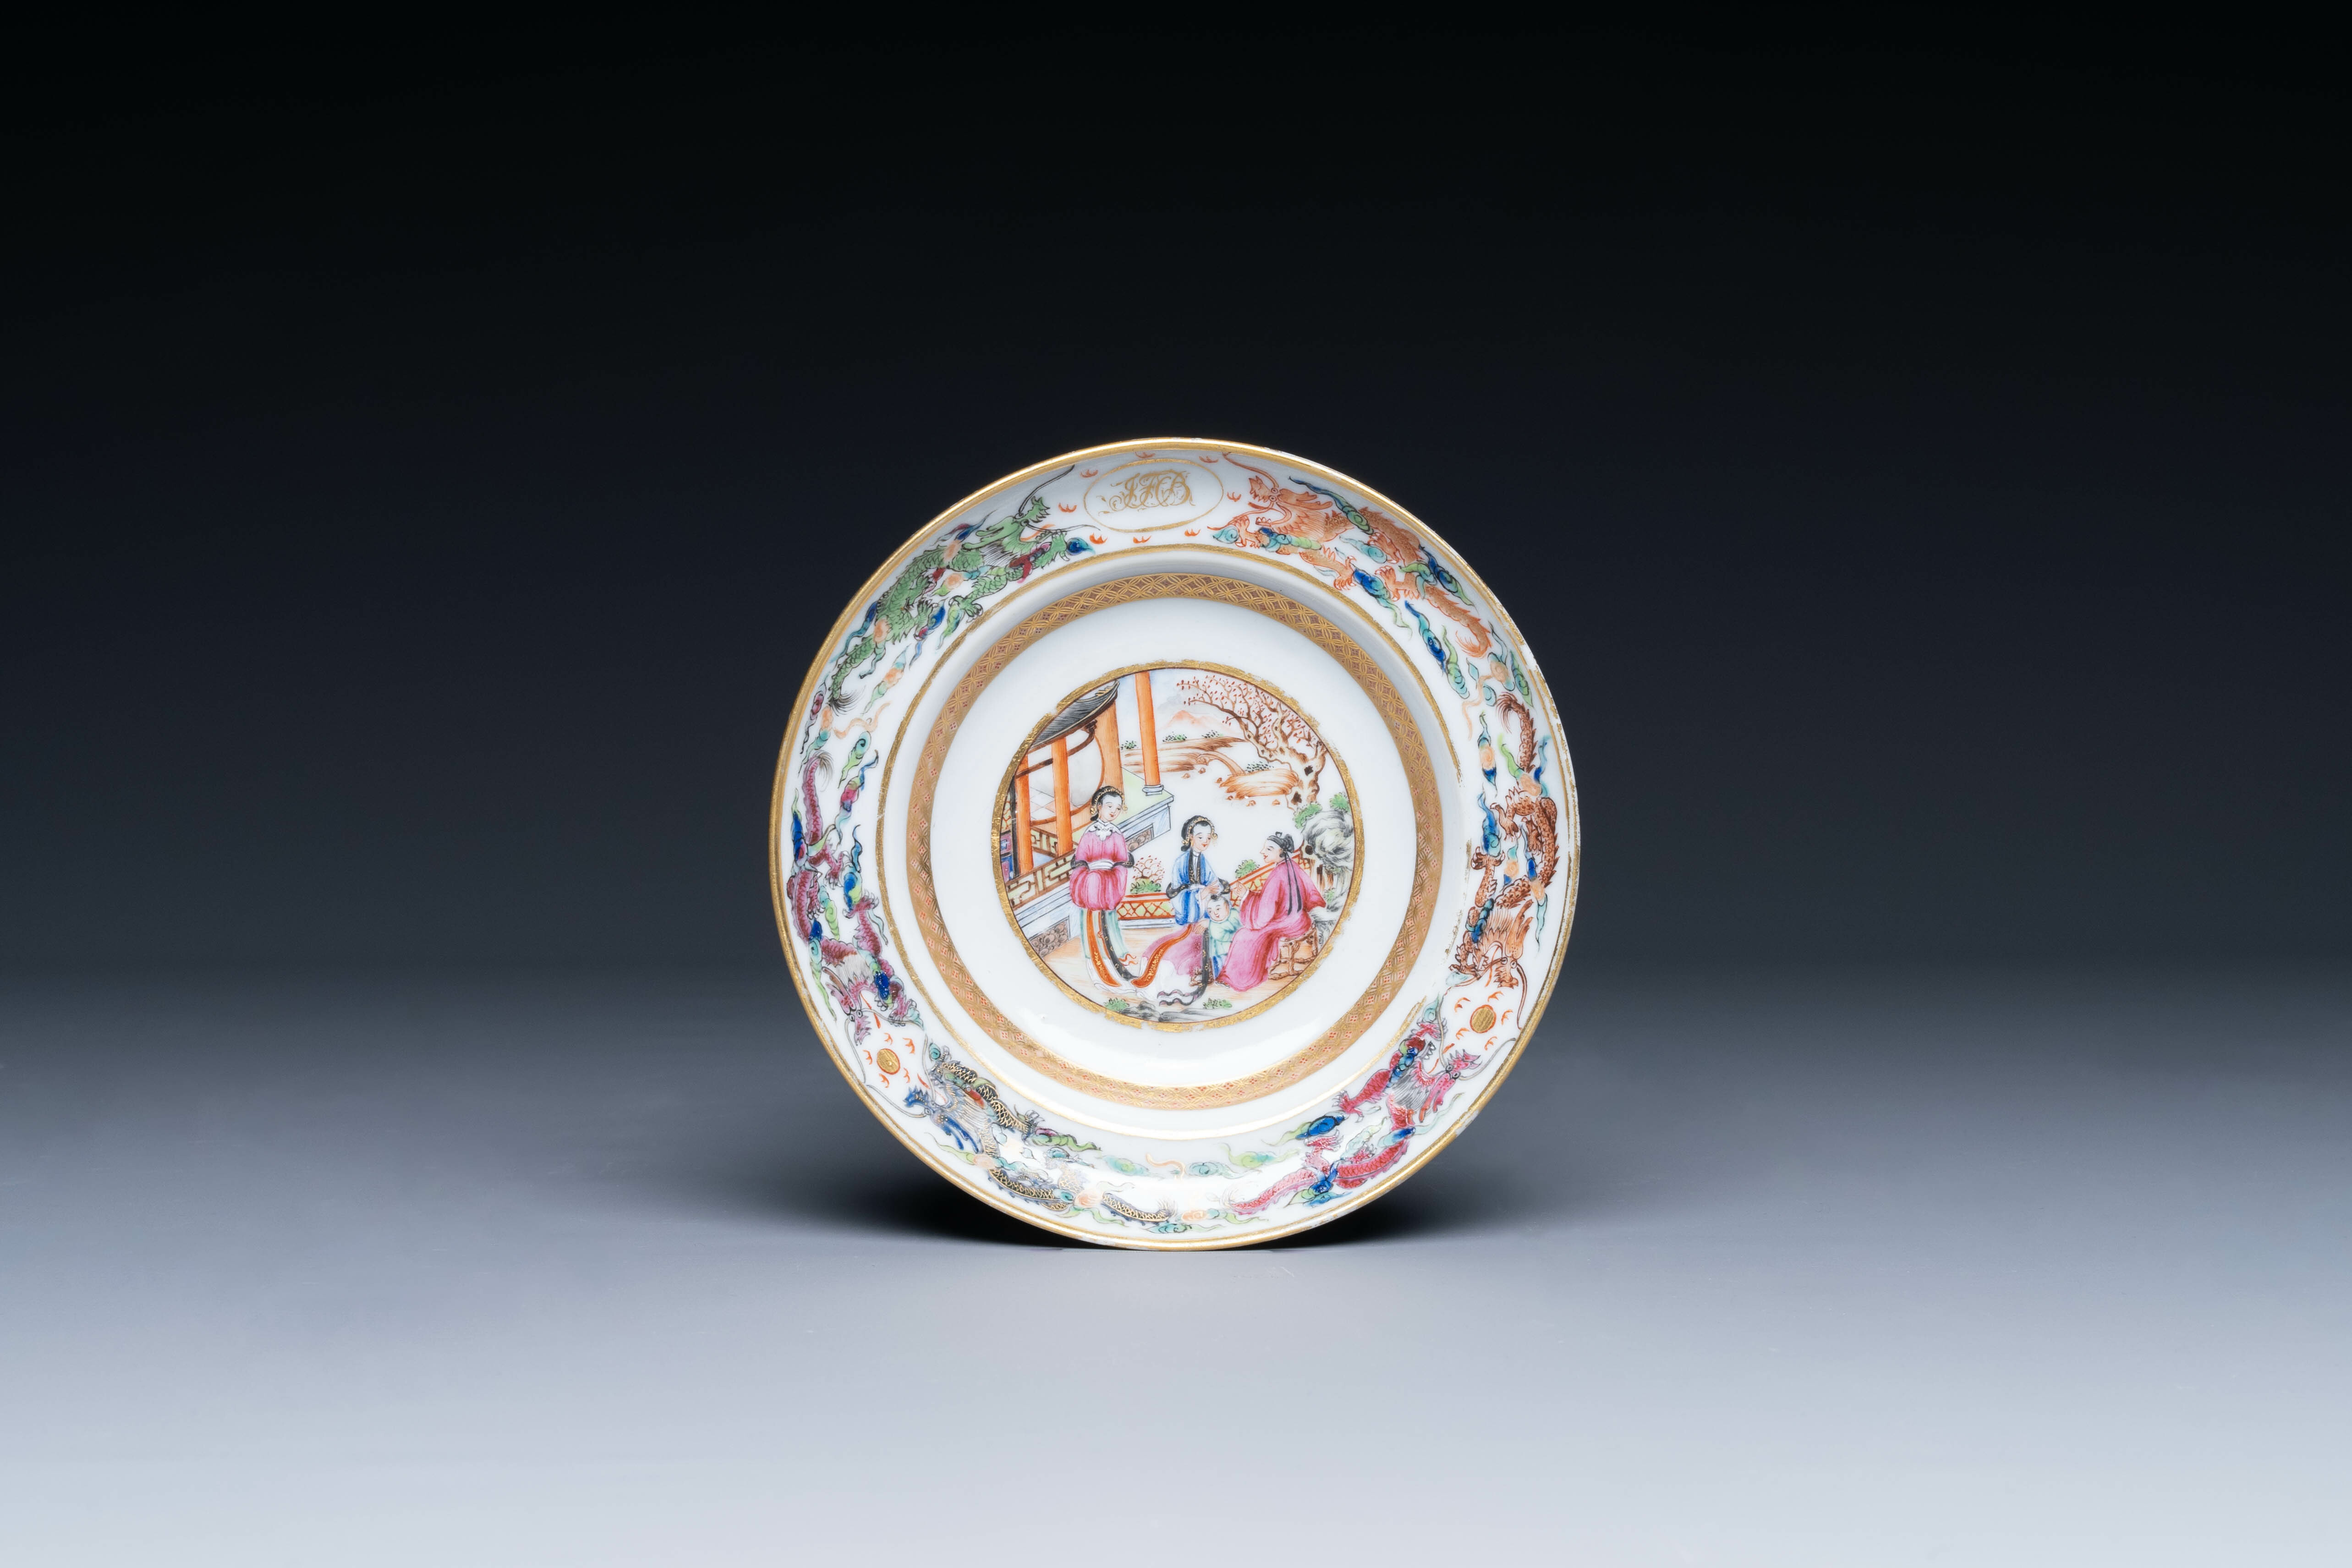 A Chinese Canton famille rose tureen with two compartments and a monogrammed plate, 19th C. - Image 2 of 5